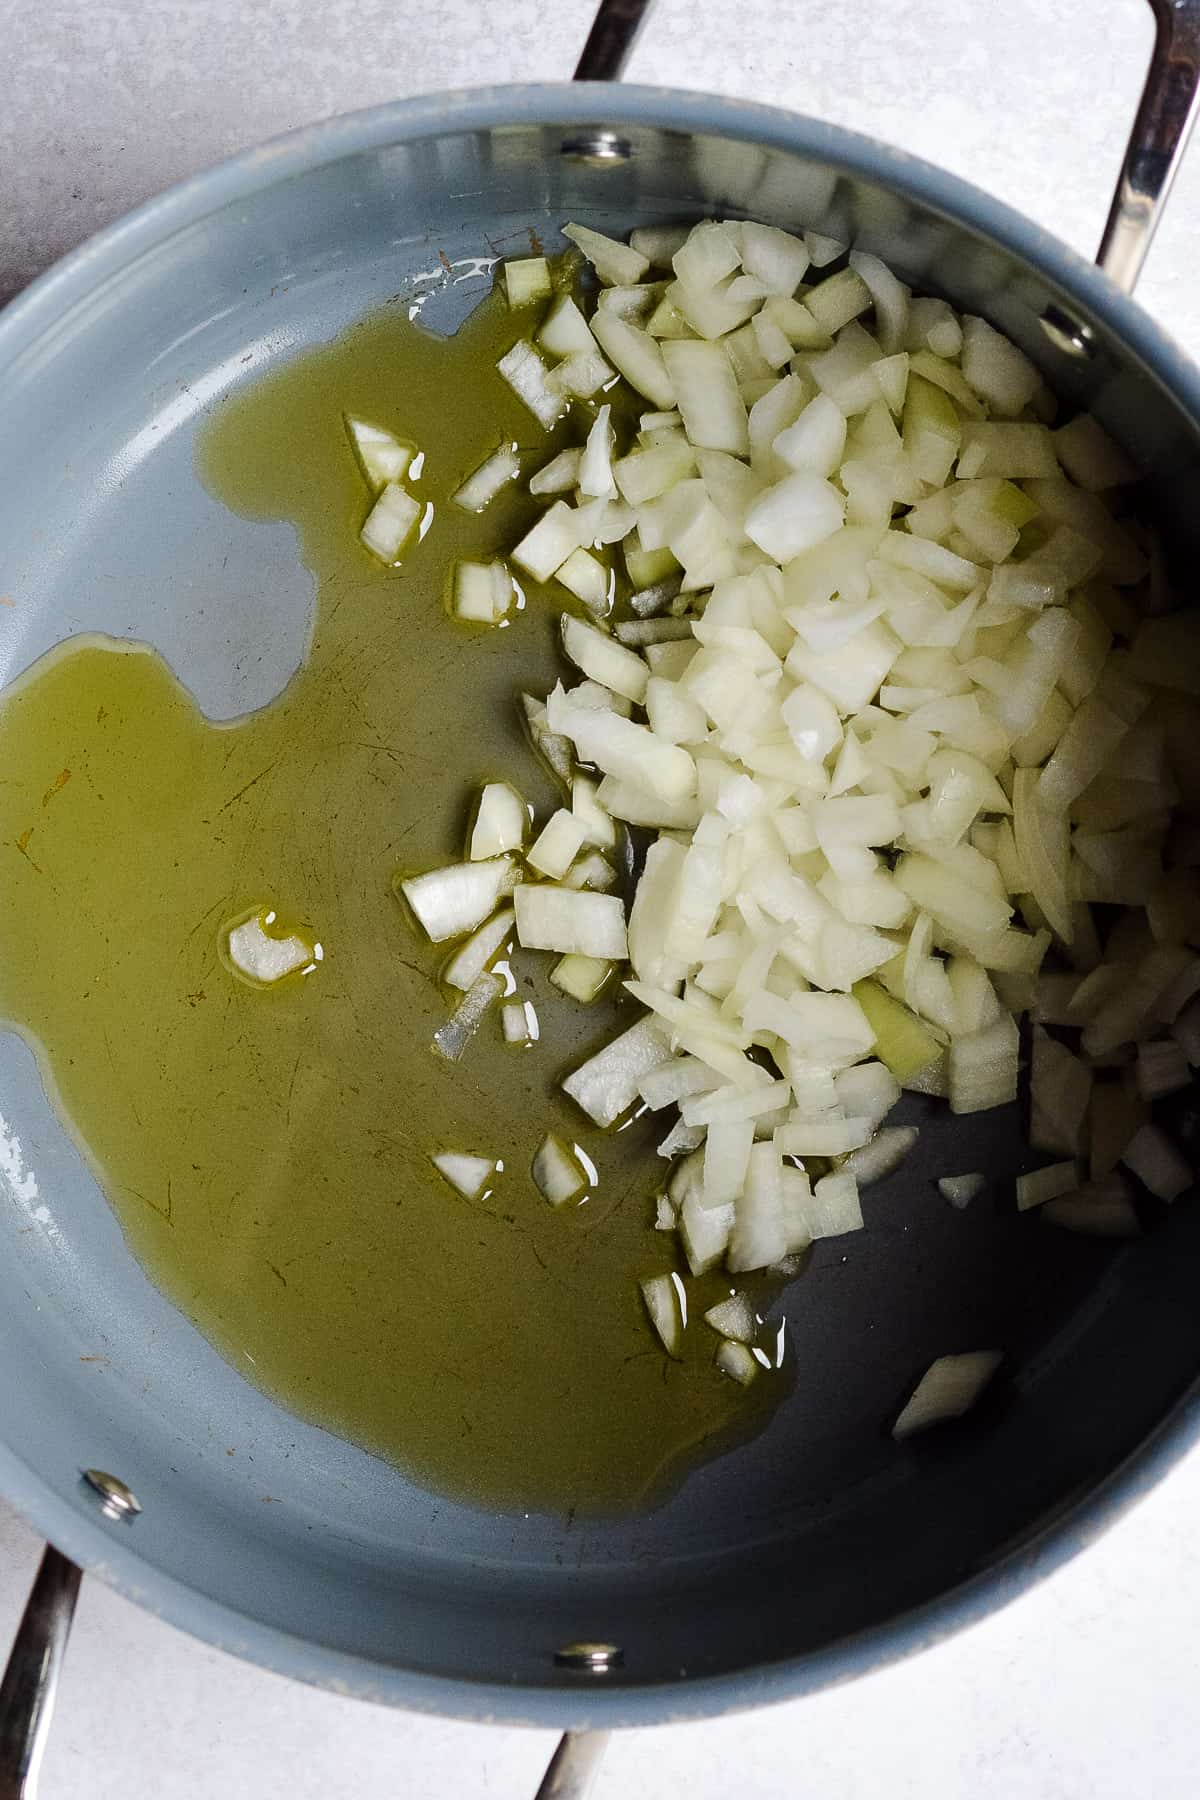 Chopped onions and olive oil in a large pot.